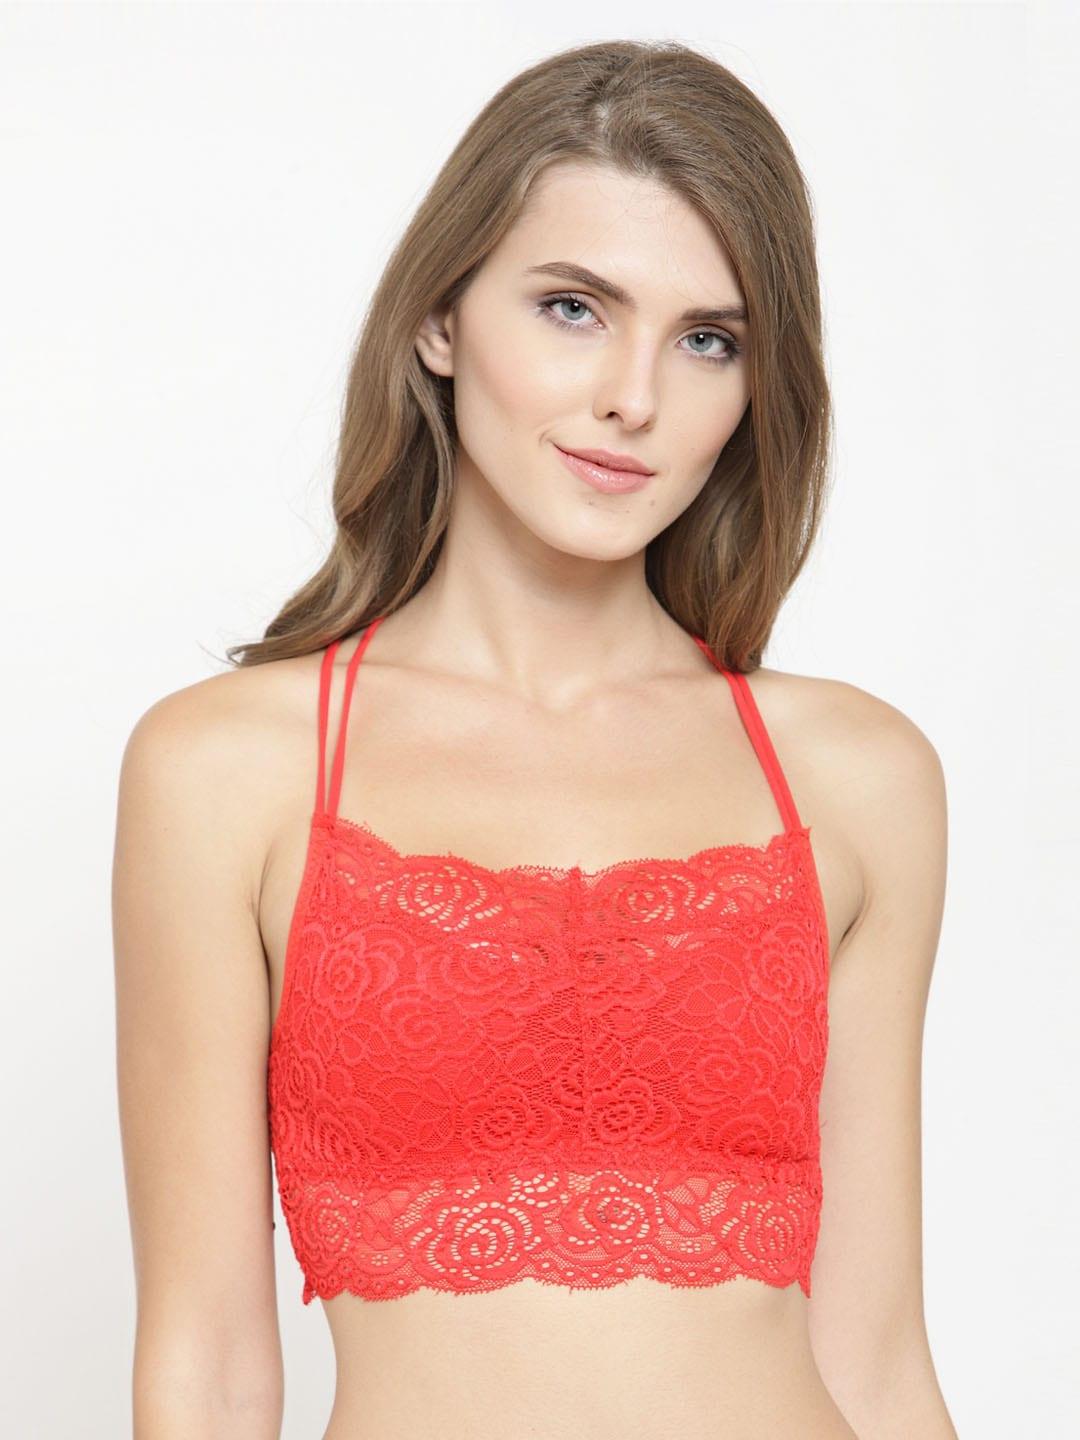 quttos-red-lace-non-wired-lightly-padded-bralette-bra-qt-sb-5126